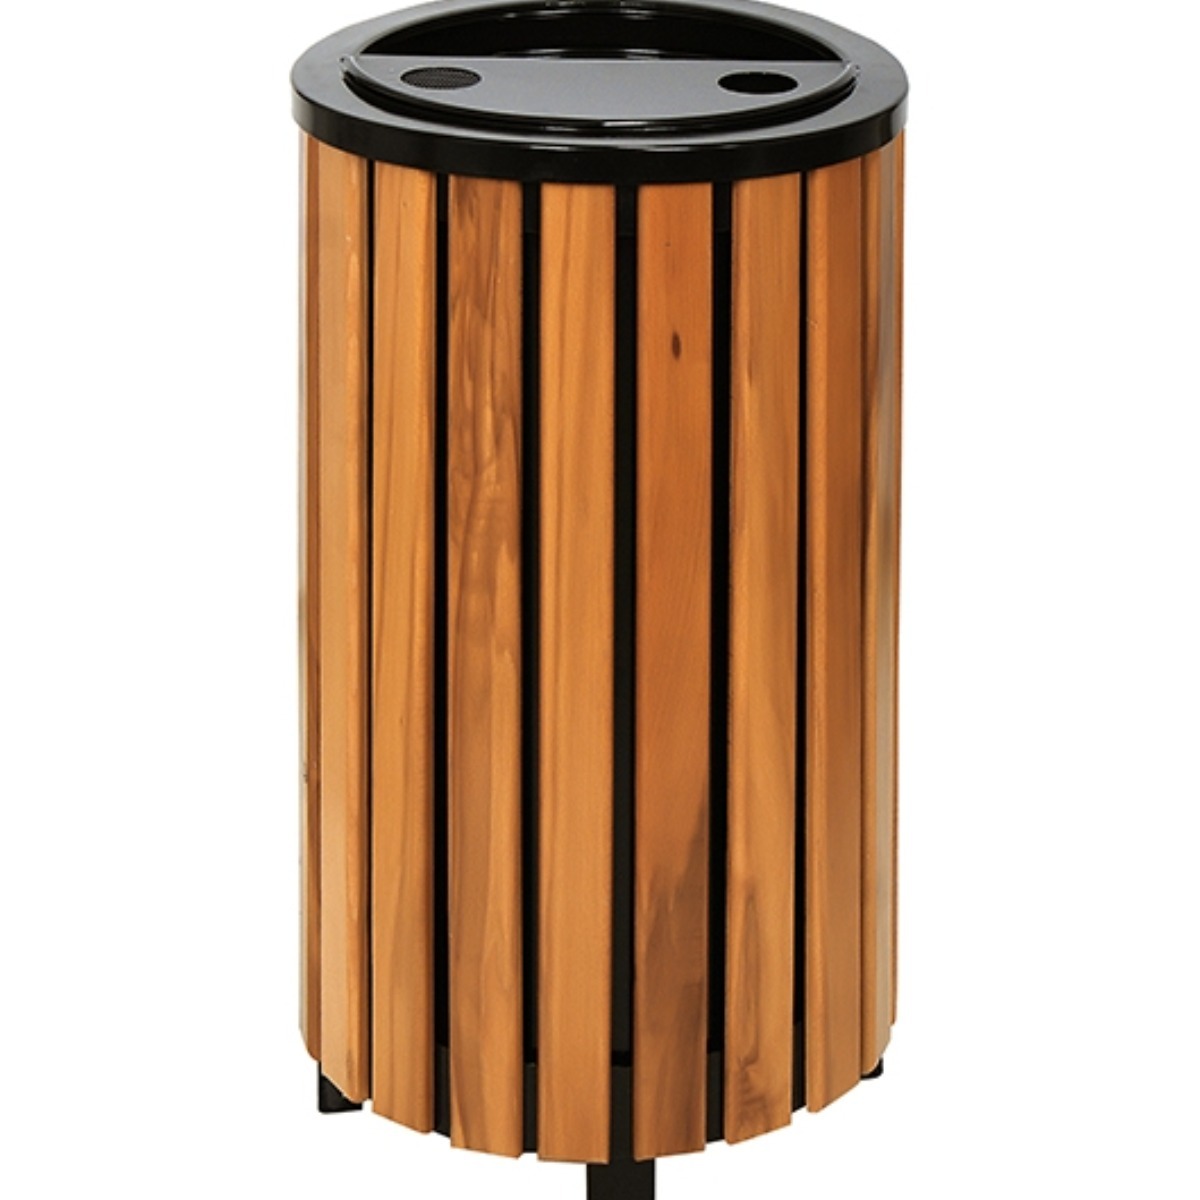 AB-510 Wood Open Space Trash Can product logo